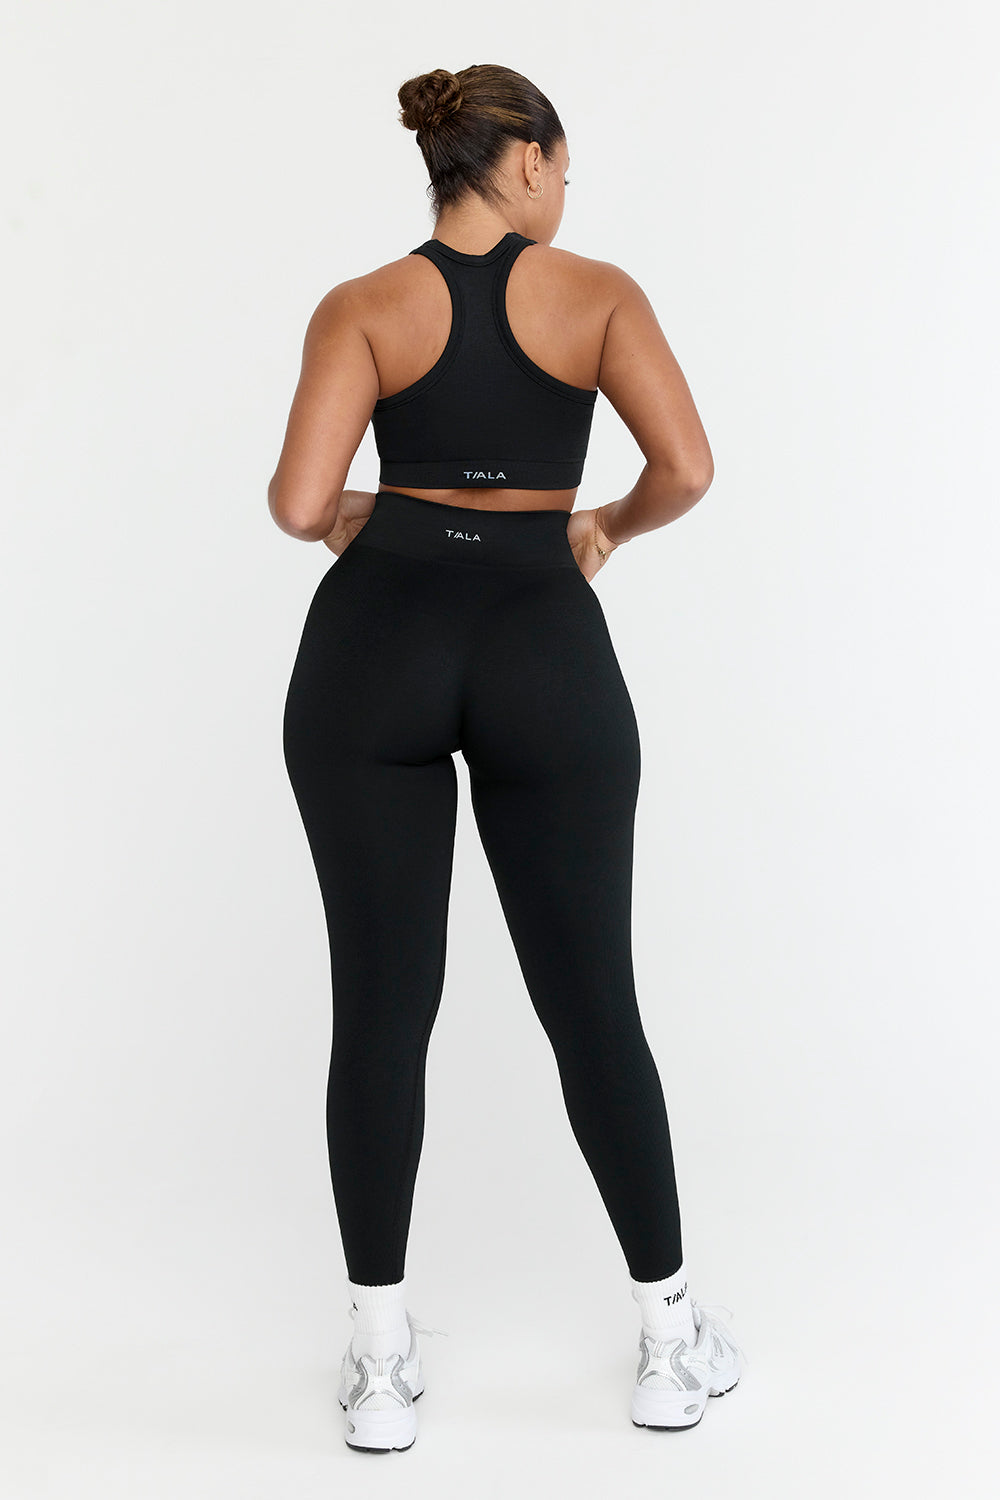 The £8.99 bestselling high waisted leggings  shoppers are